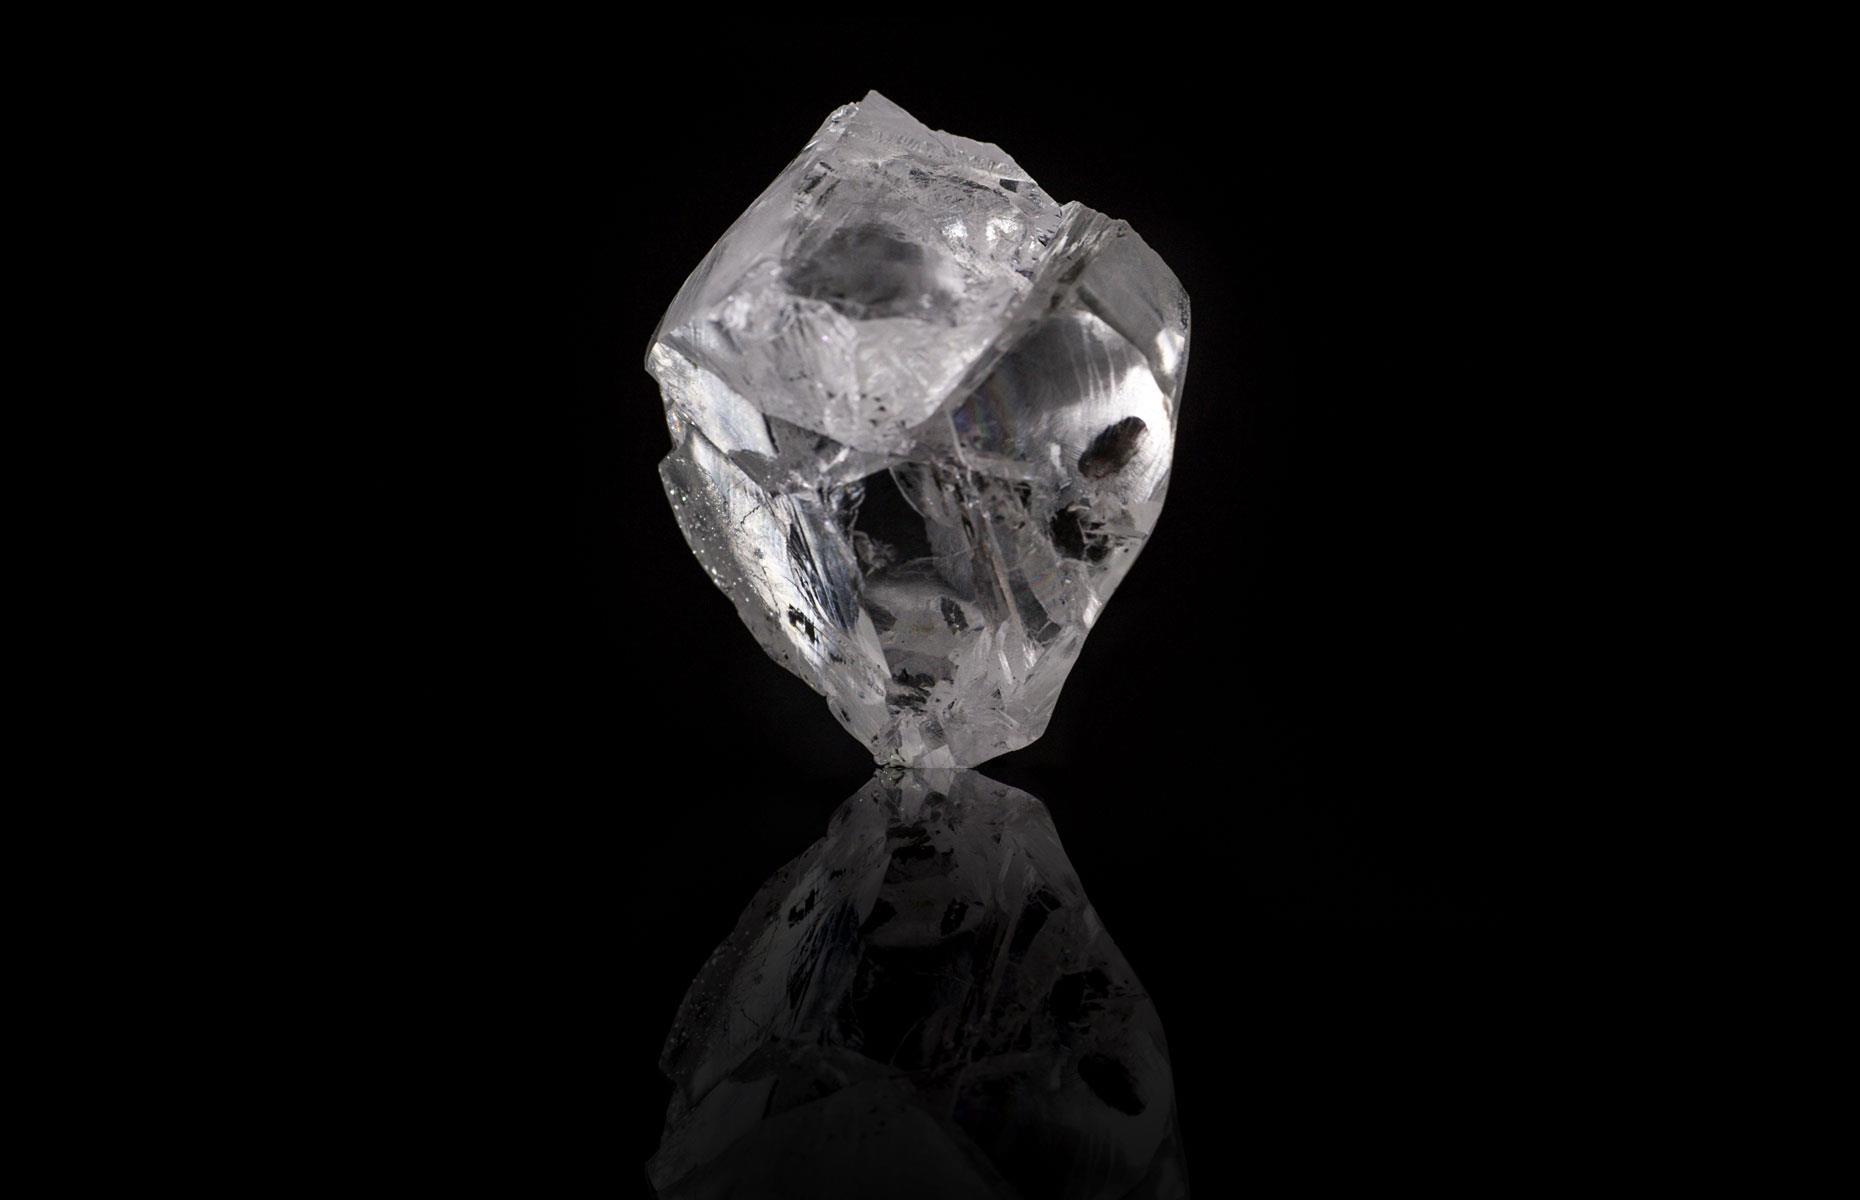 2018: The fifth-largest diamond in the world